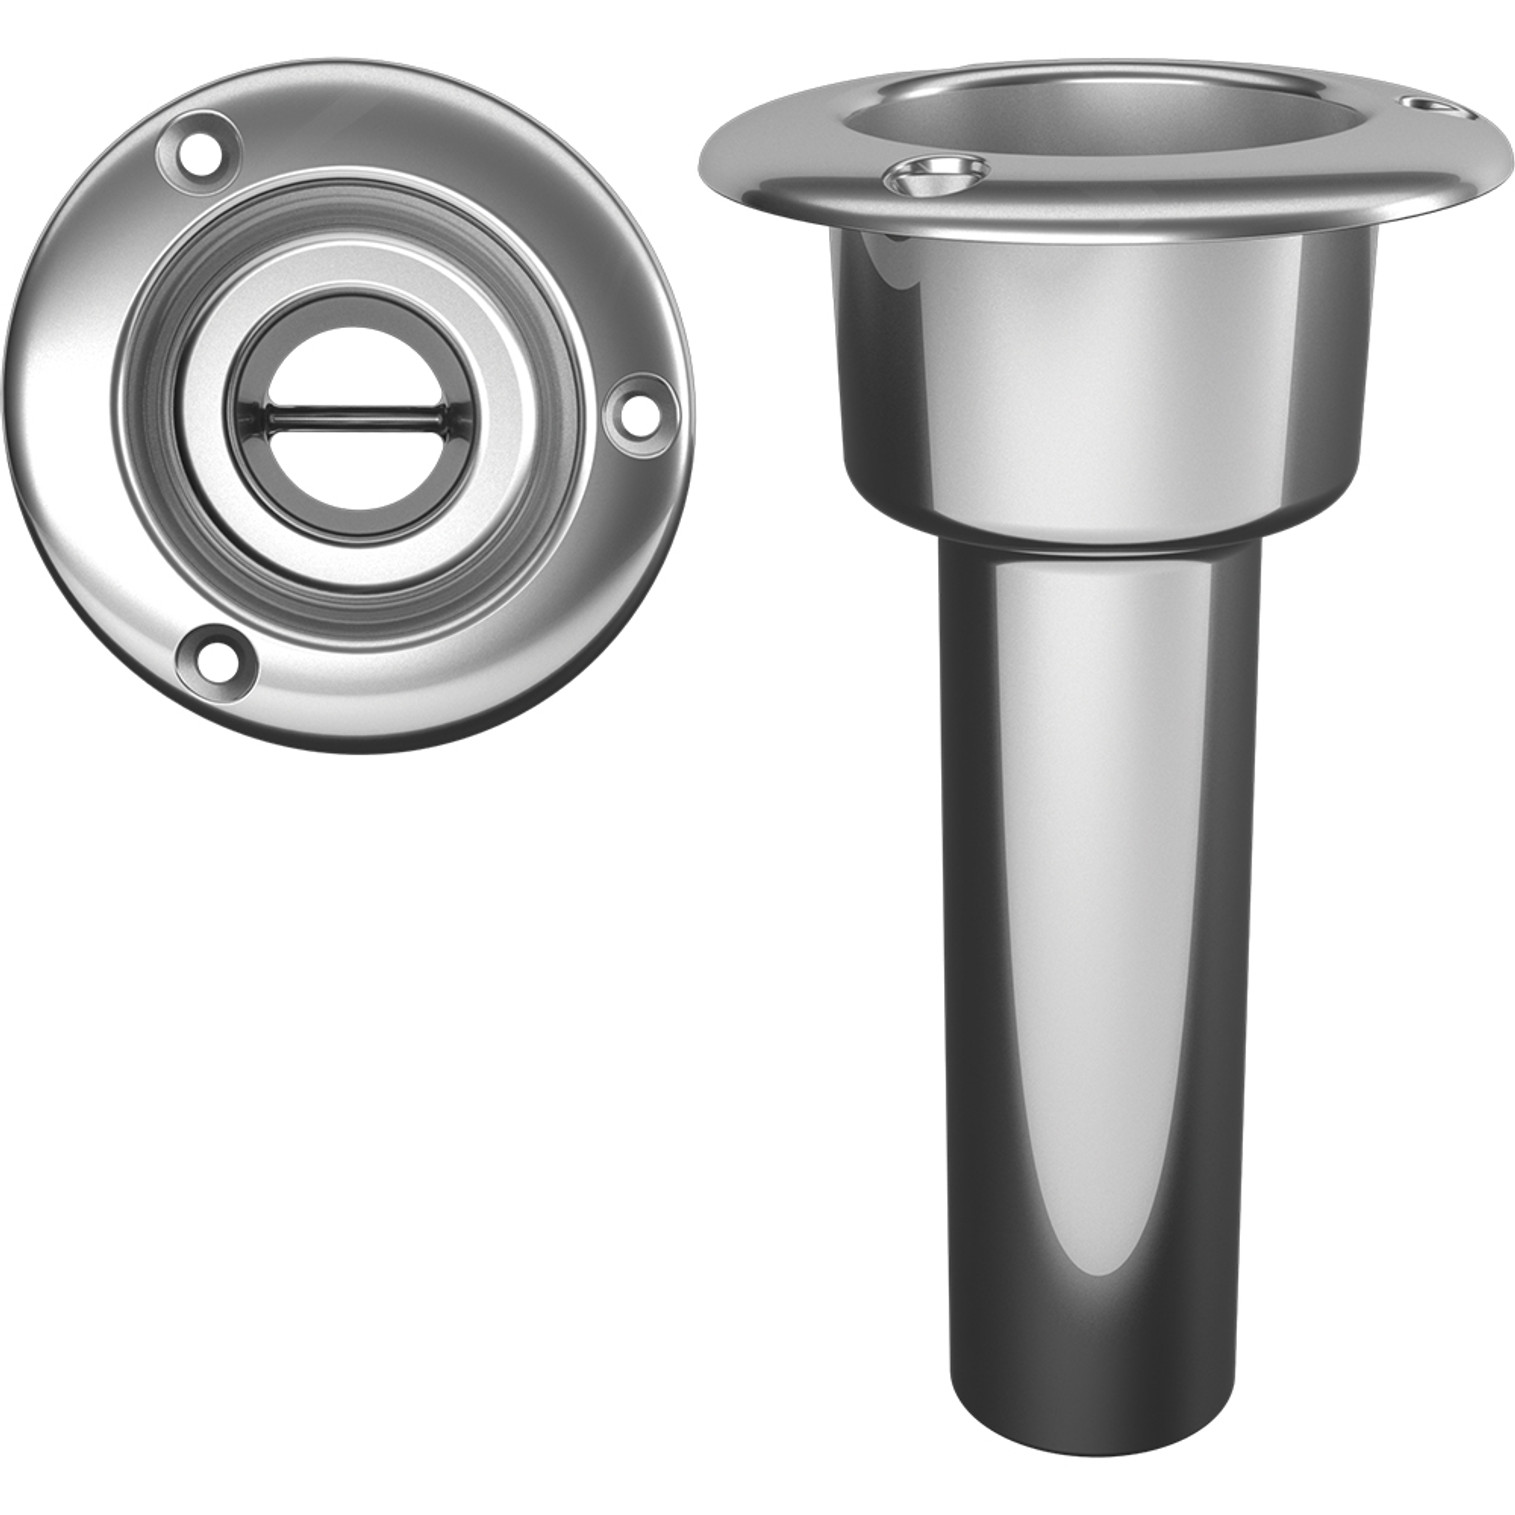 Mate Series Stainless Steel 0 Rod & Cup Holder - Open - Round Top